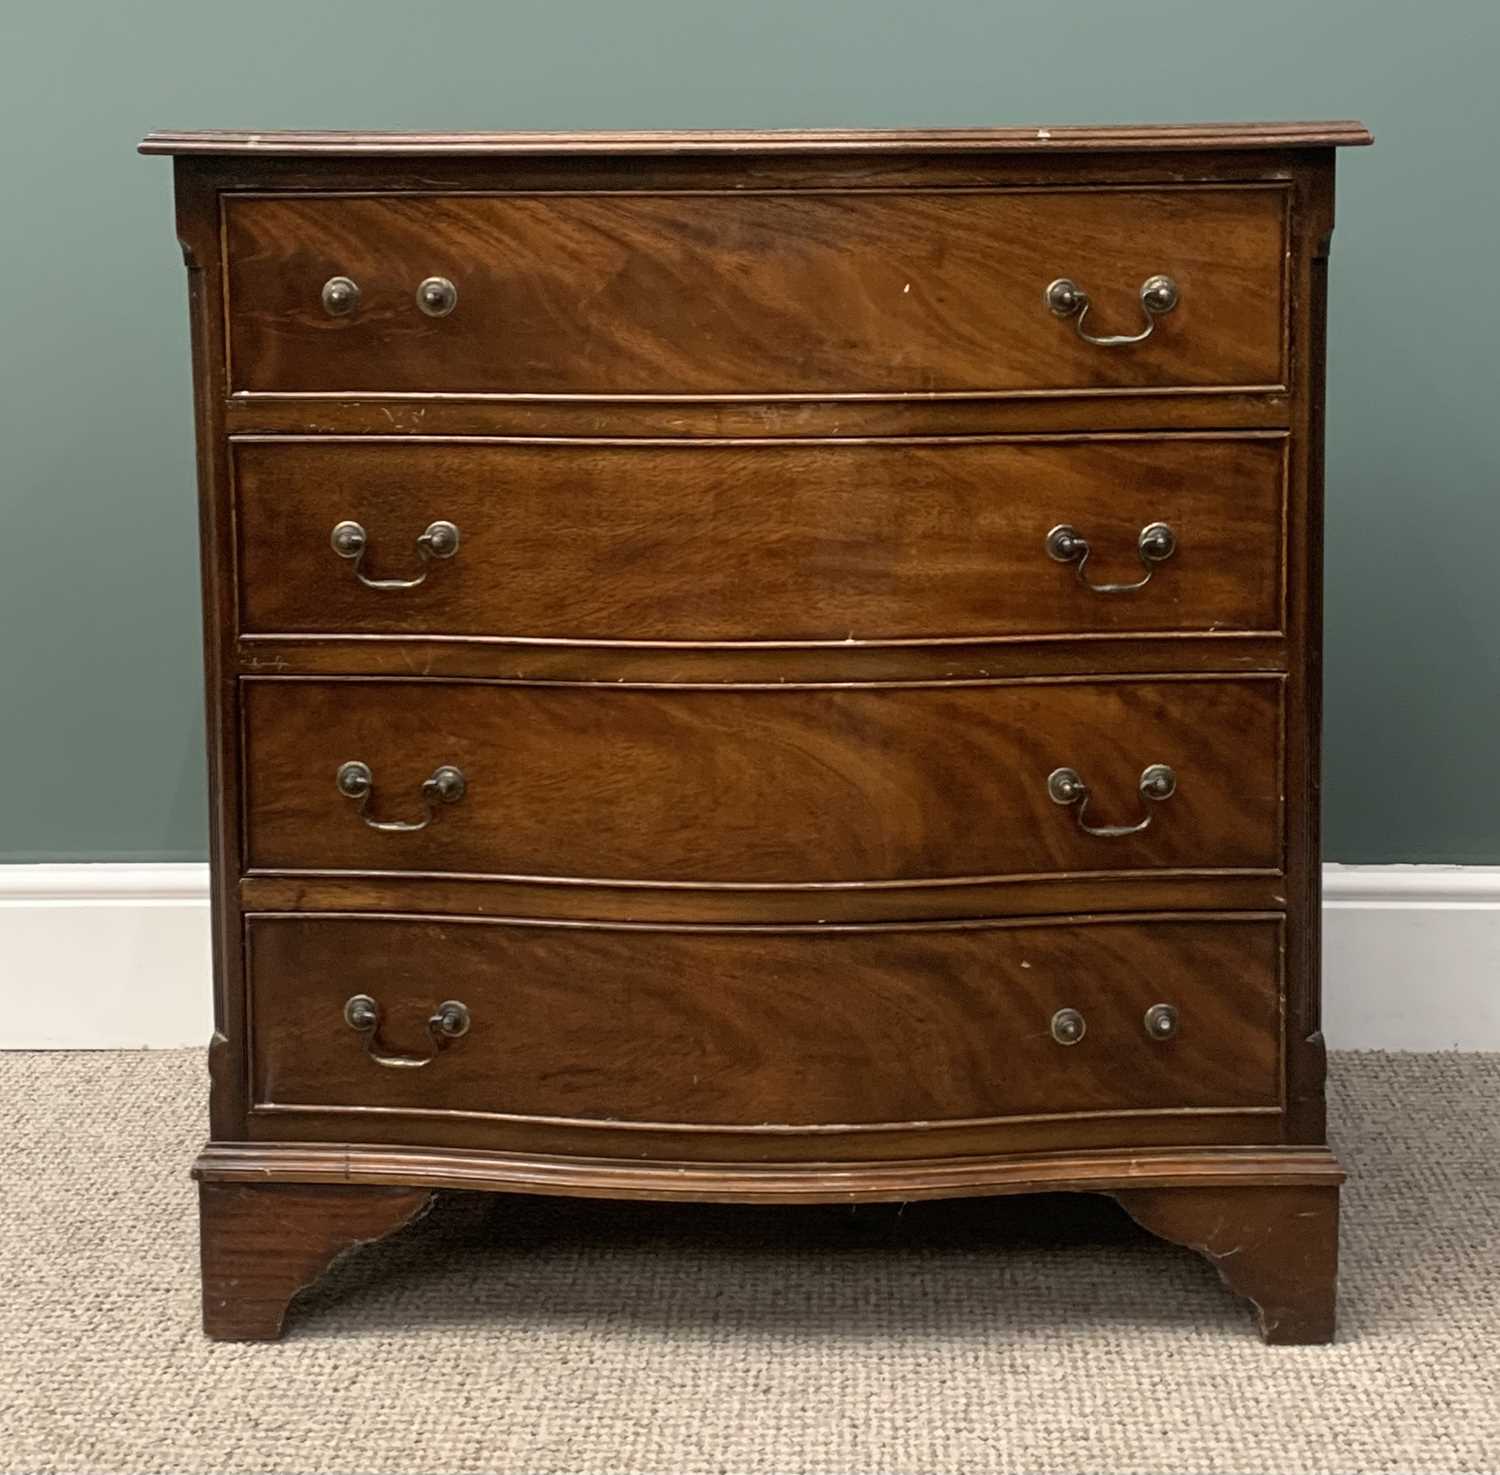 REPRODUCTION MAHOGANY FOUR DRAWER CHEST, with serpentine front, 83 (h) x 79 (w) x 46cms (d)